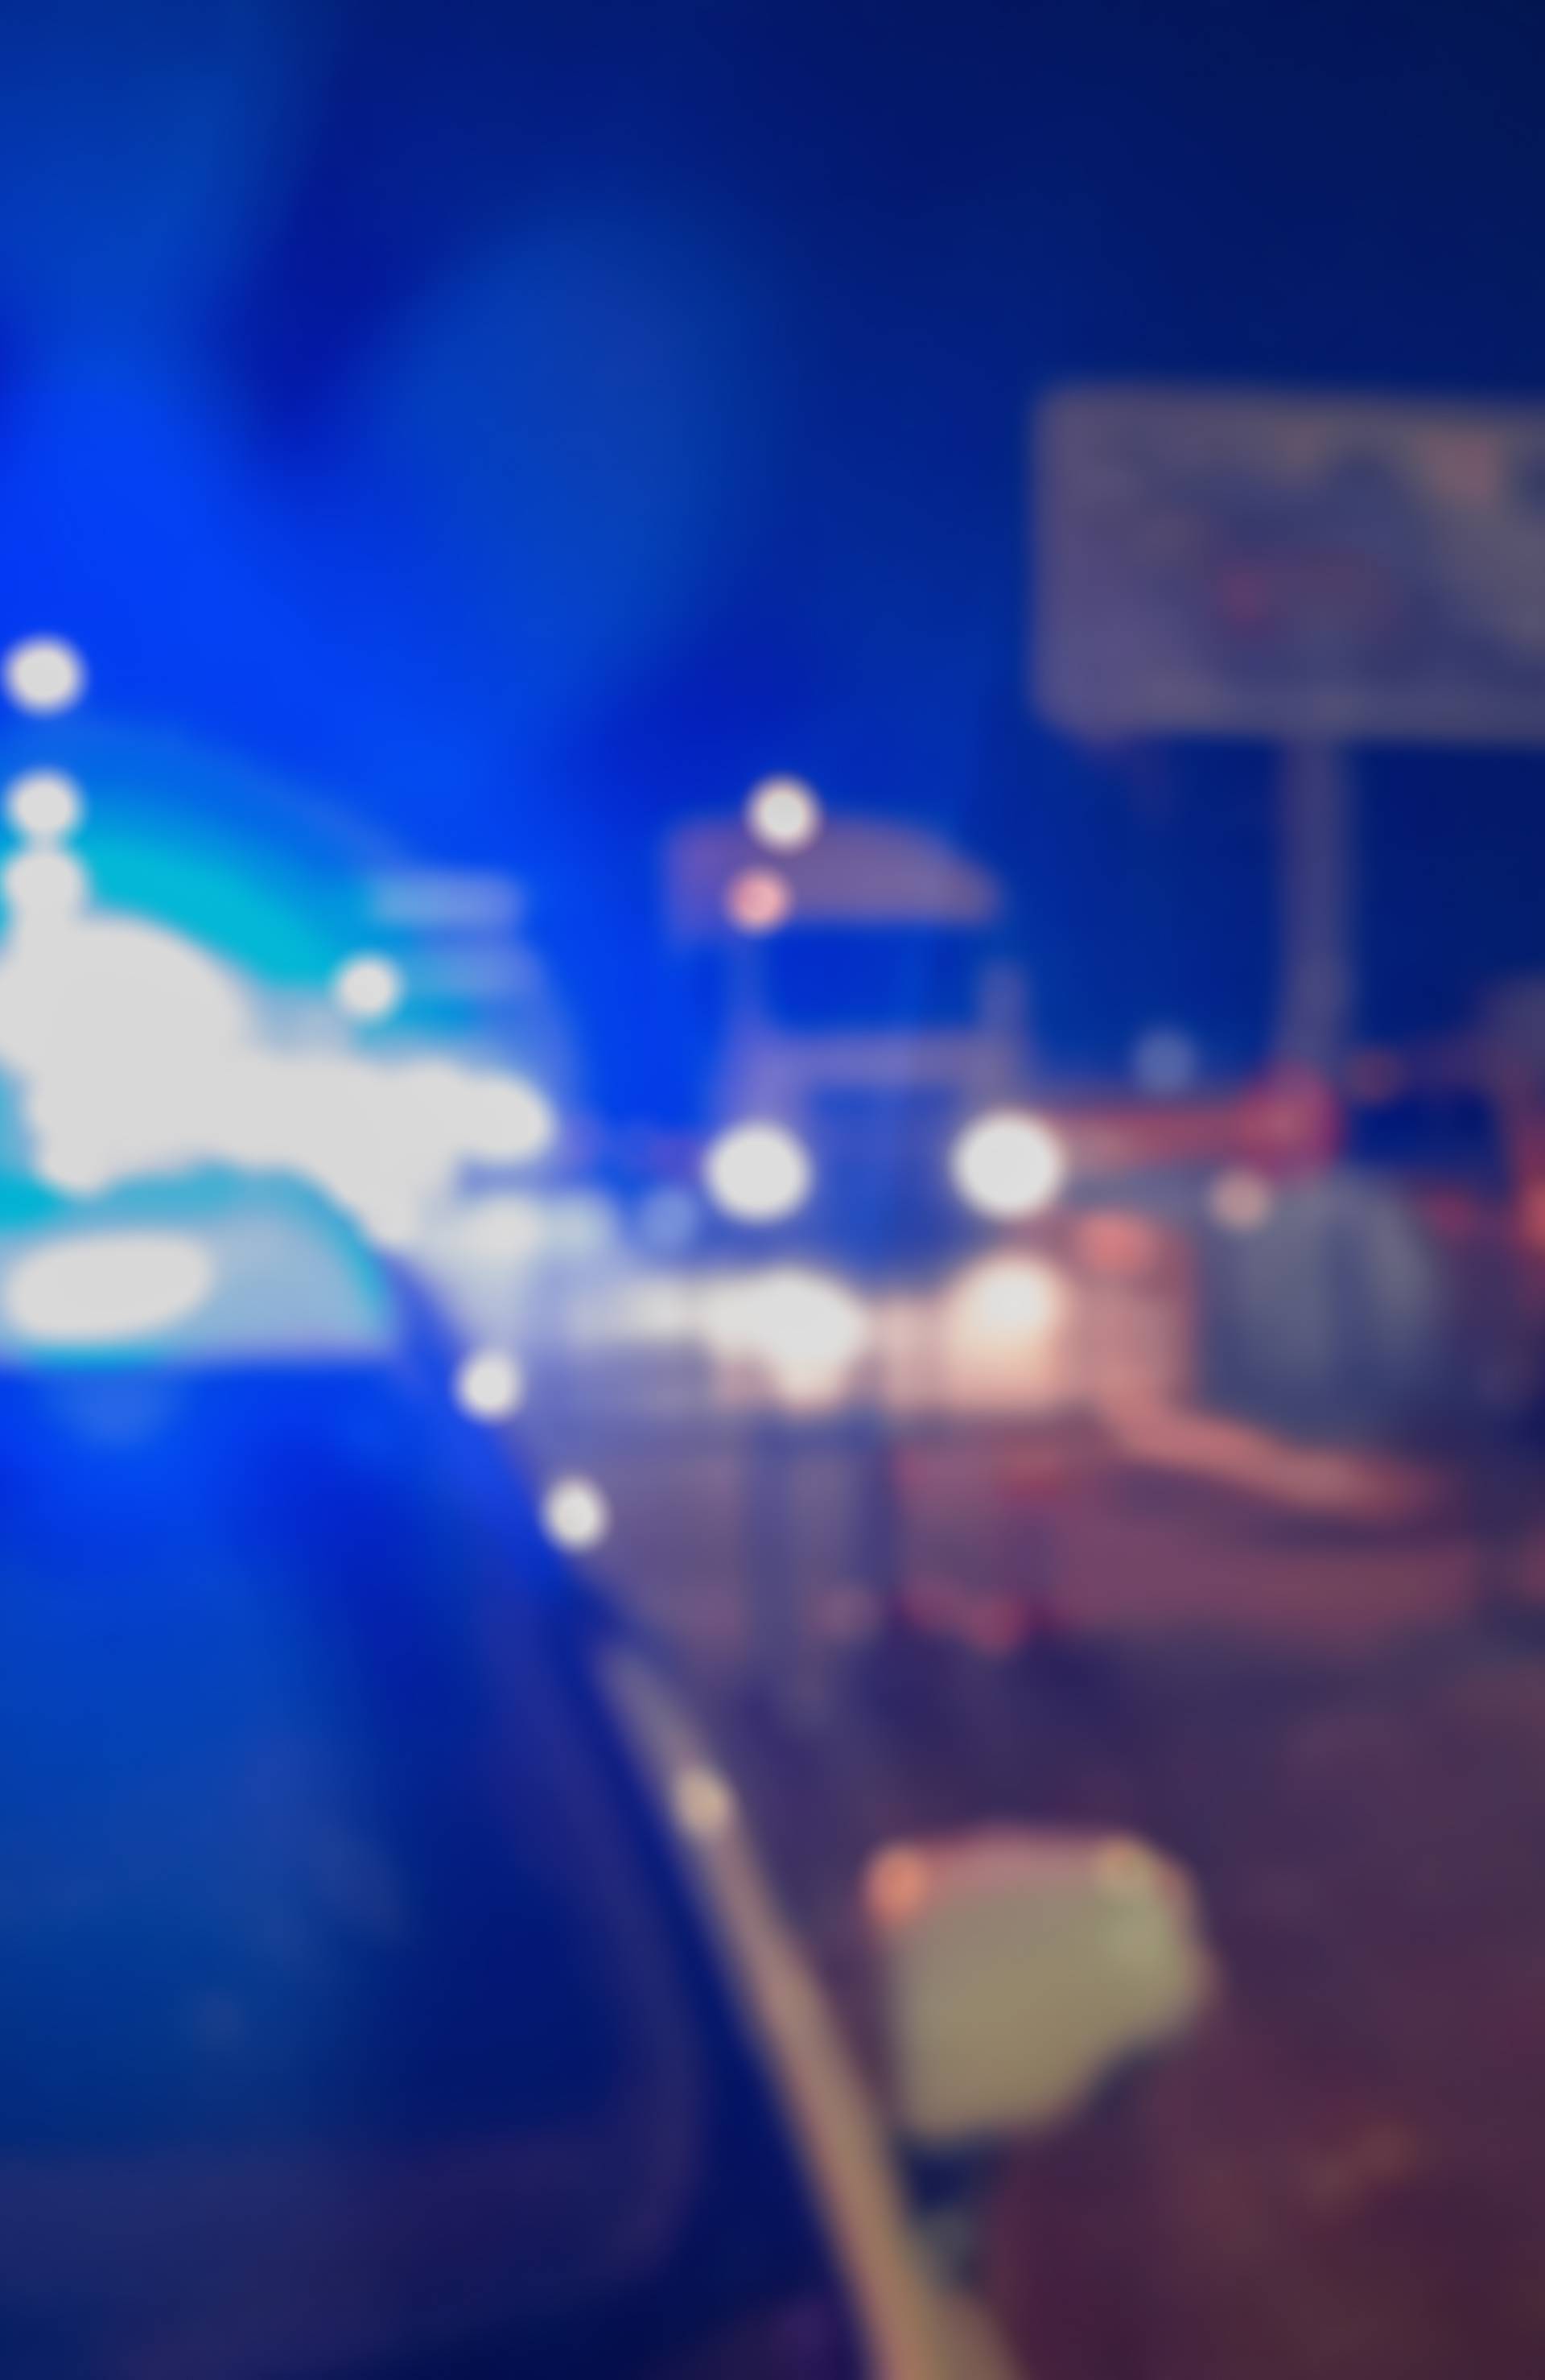 Unrecognizable blurry police car lights and police force officer on night road background, crime scene, night patrolling the city. Abstract  defocused image.